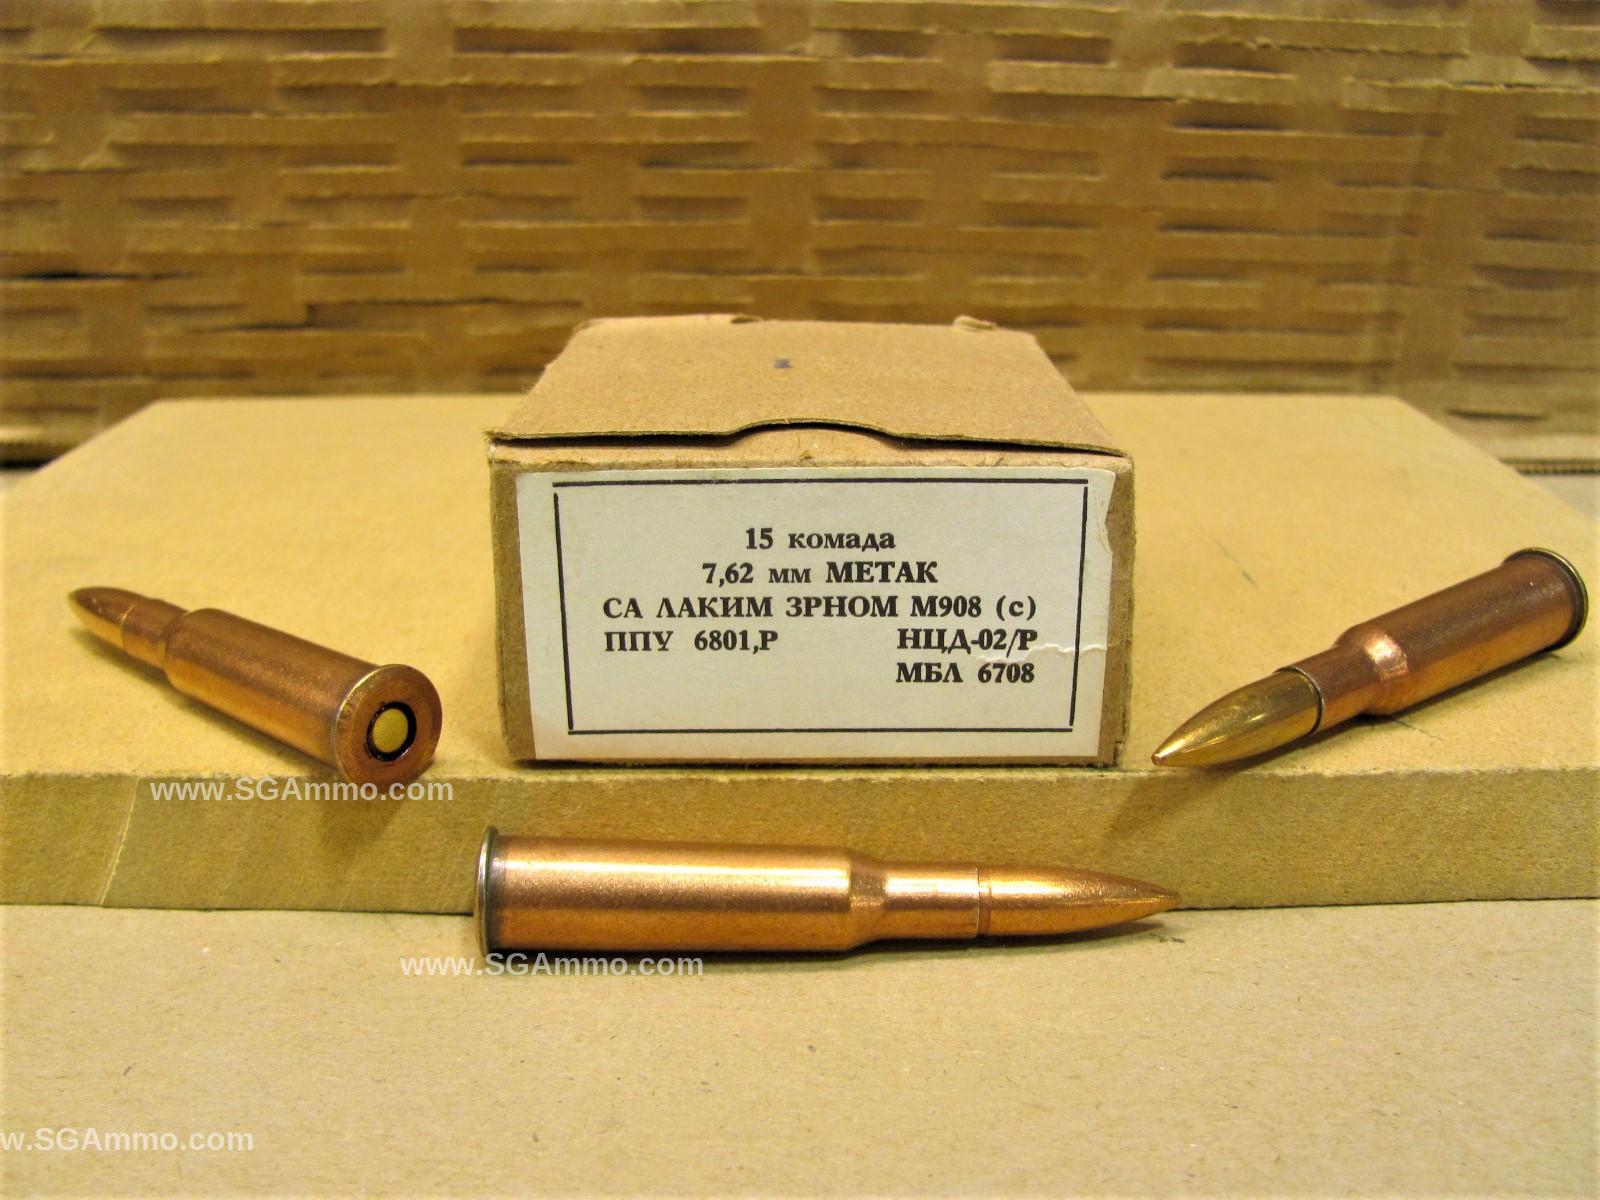 480 Round Can - 7.62x54R 148 Grain FMJ Yugo M908 Surplus Copper Washed Steel Case Ammo - Packed in Metal Canister